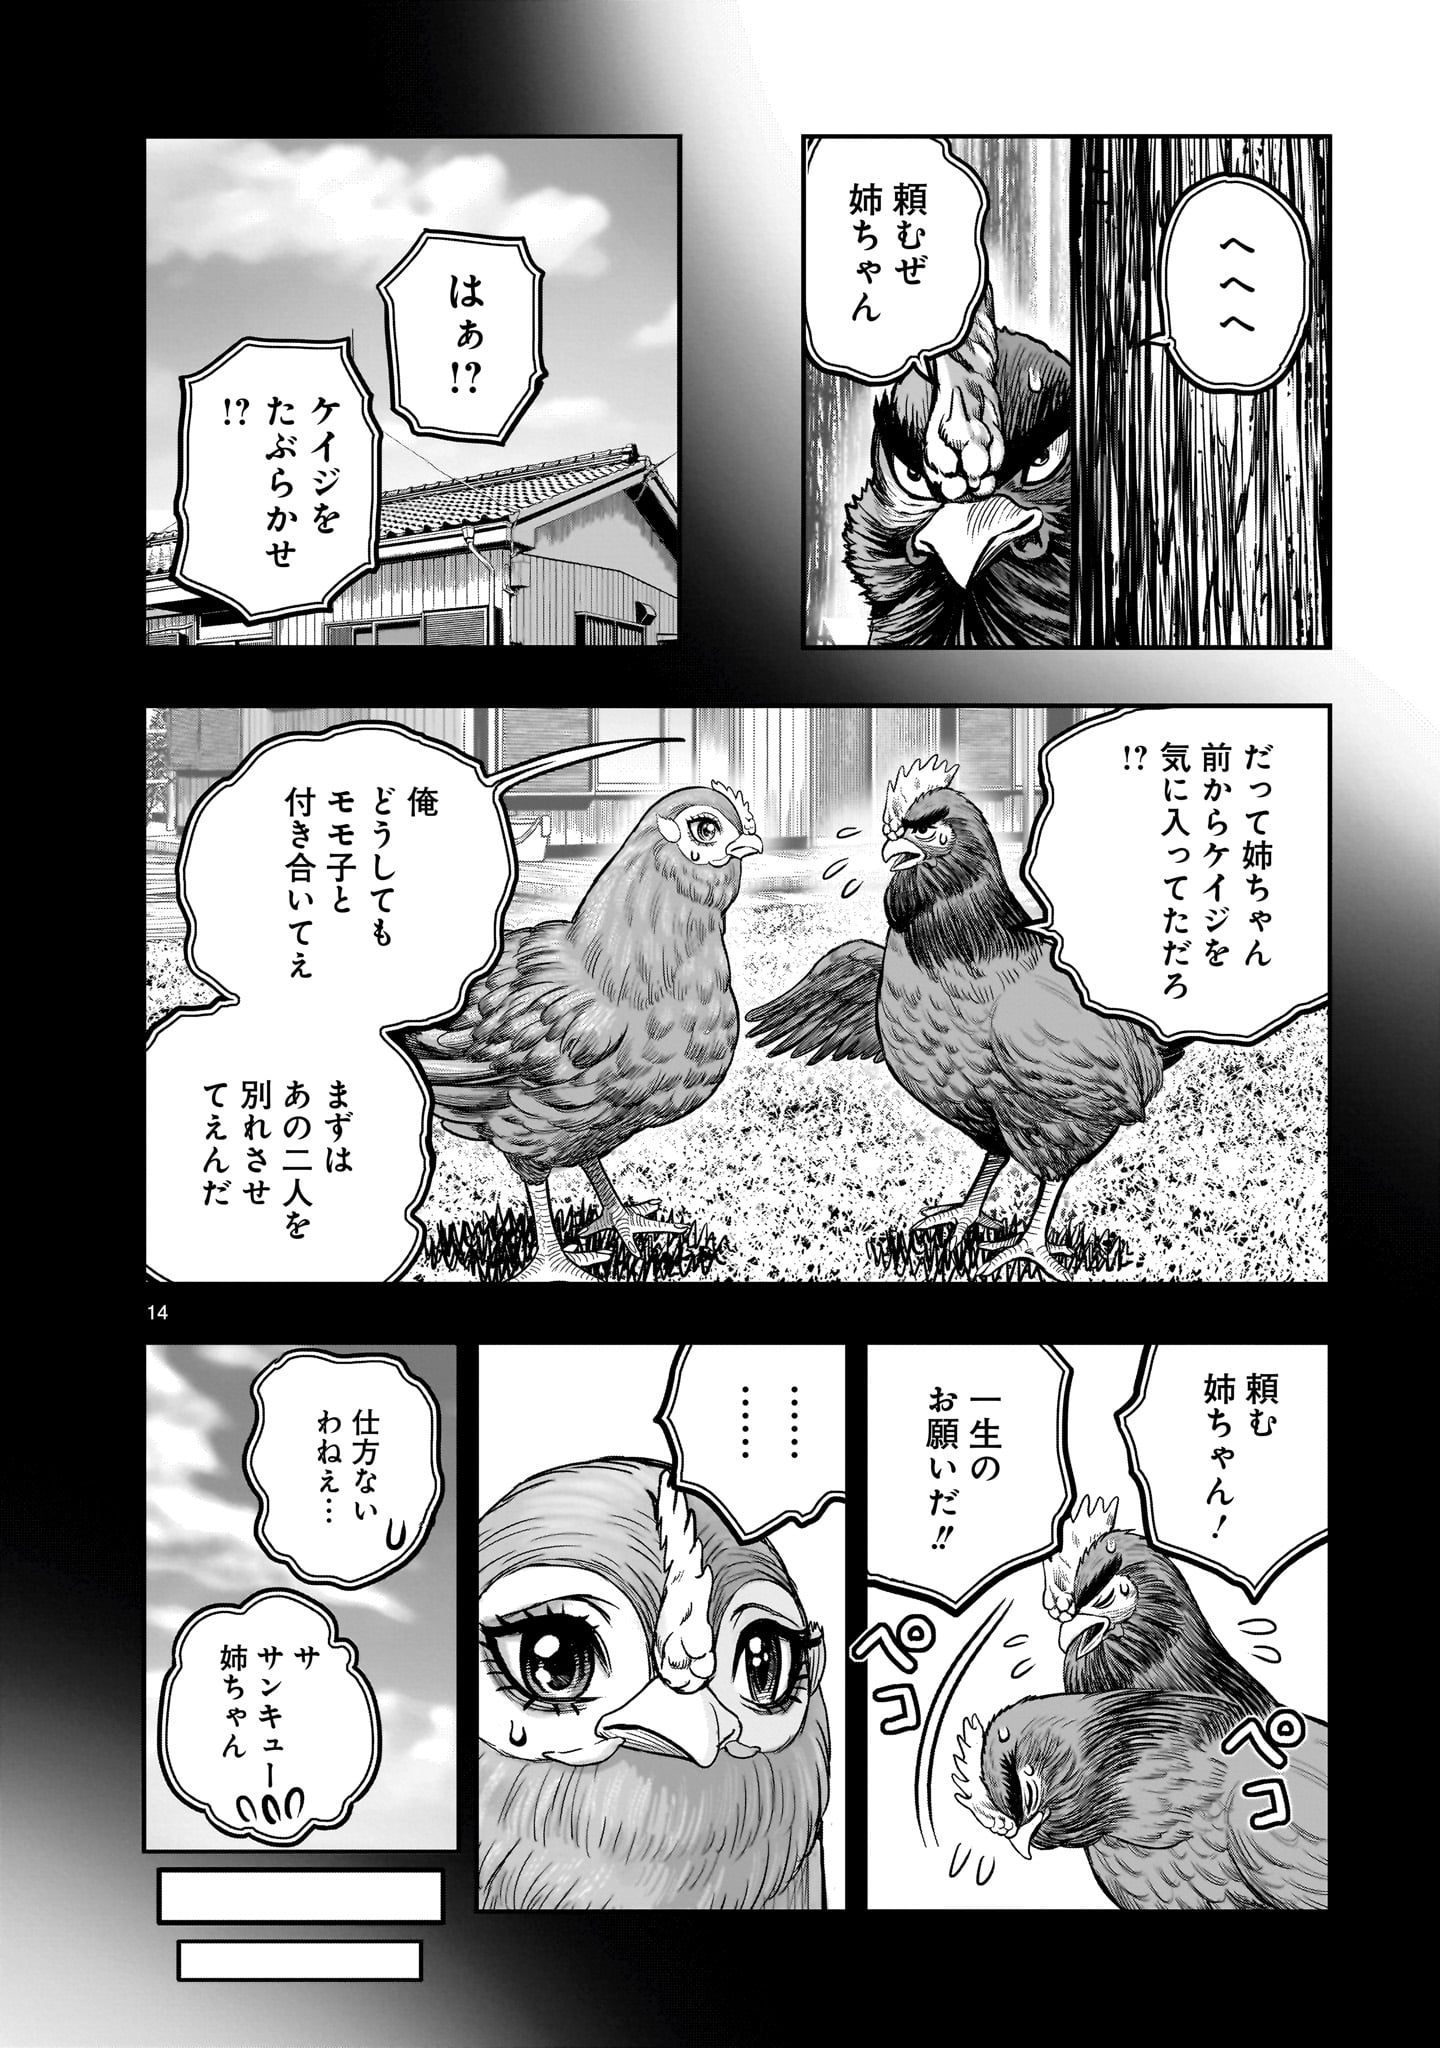 Niwatori Fighter - Chapter 36.5 - Page 14